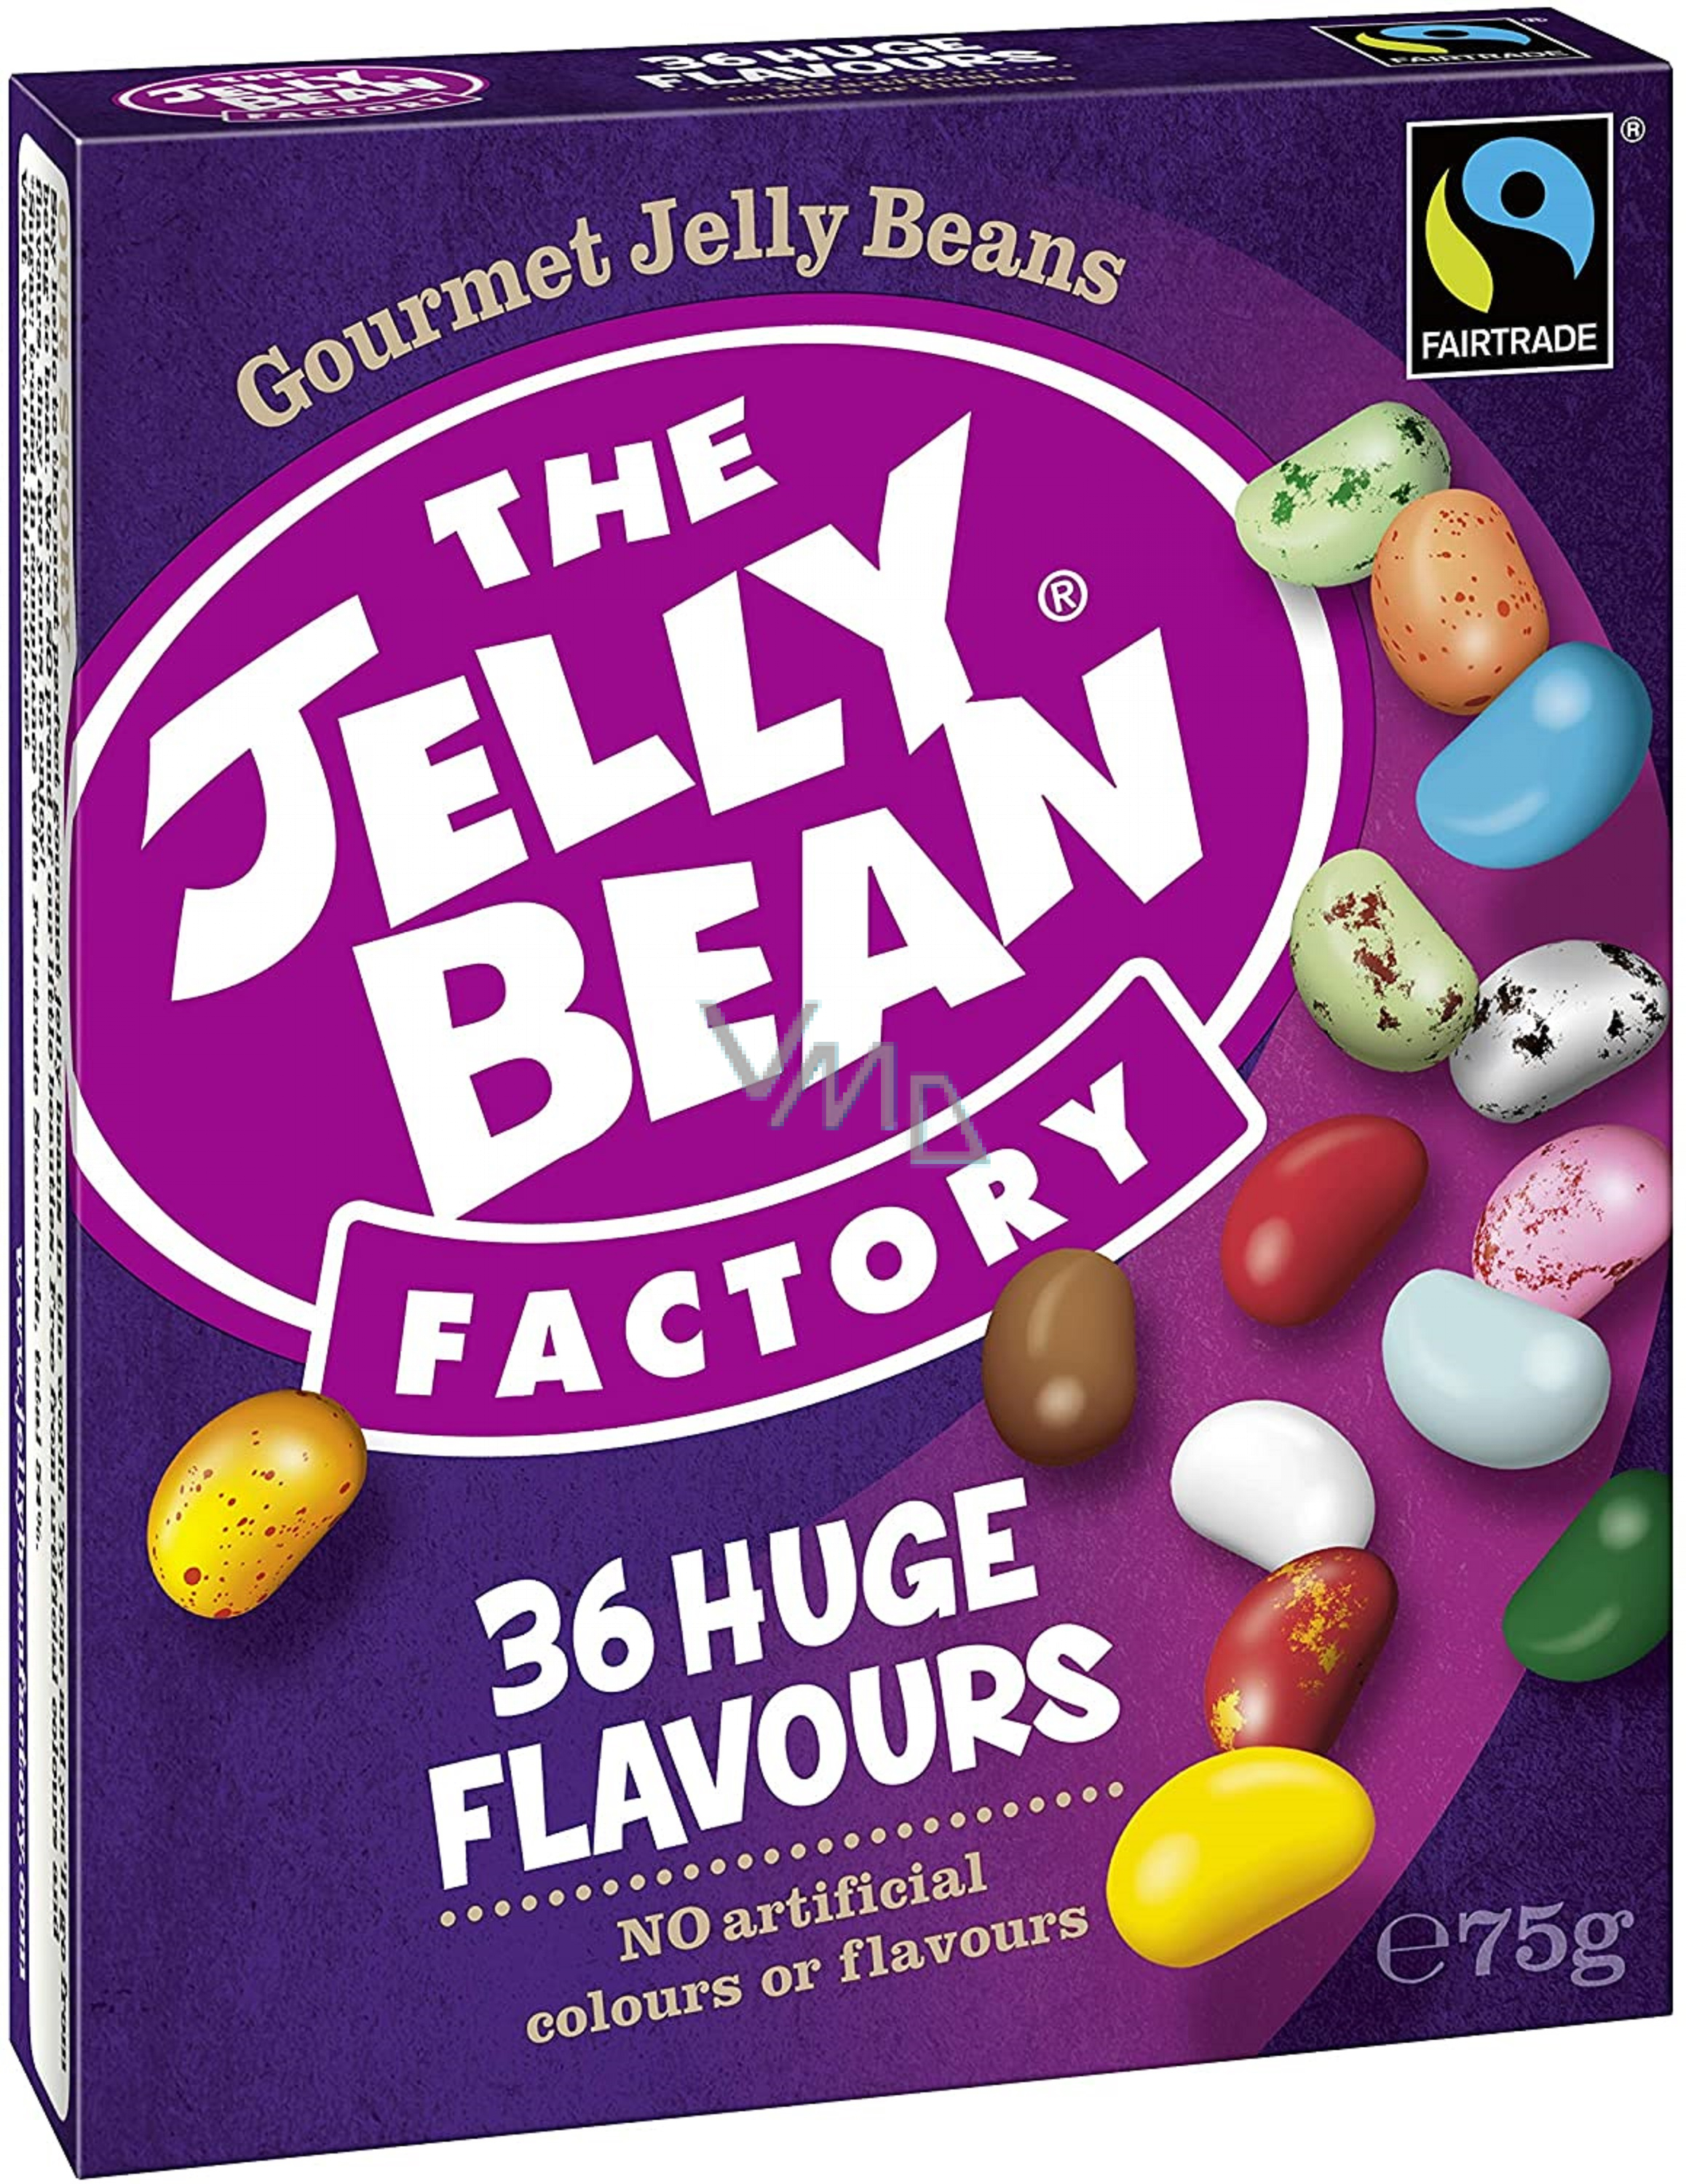 Jelly bean onlyfans. The Jelly Bean Factory 36. The Jelly Bean Factory 36 вкусов. Драже the Jelly Bean Factory 75гр.. The Jelly Bean Factory вкусы.